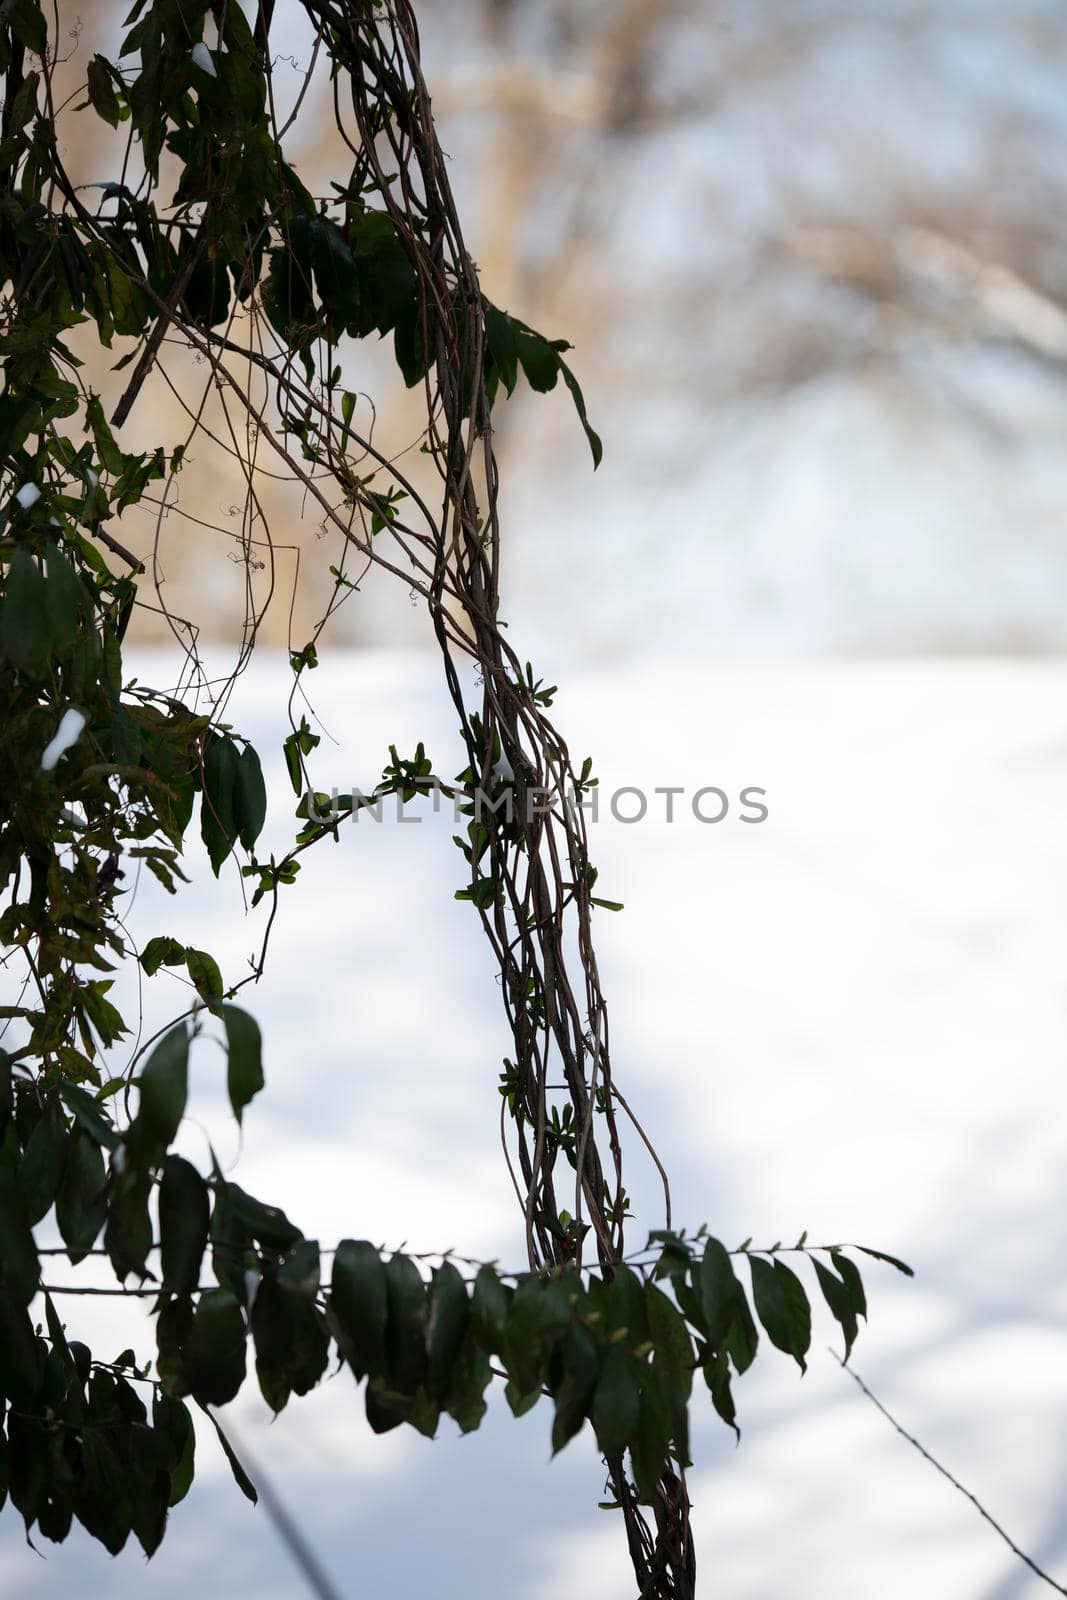 Vine in Front of Snow-Covered Roof by tornado98